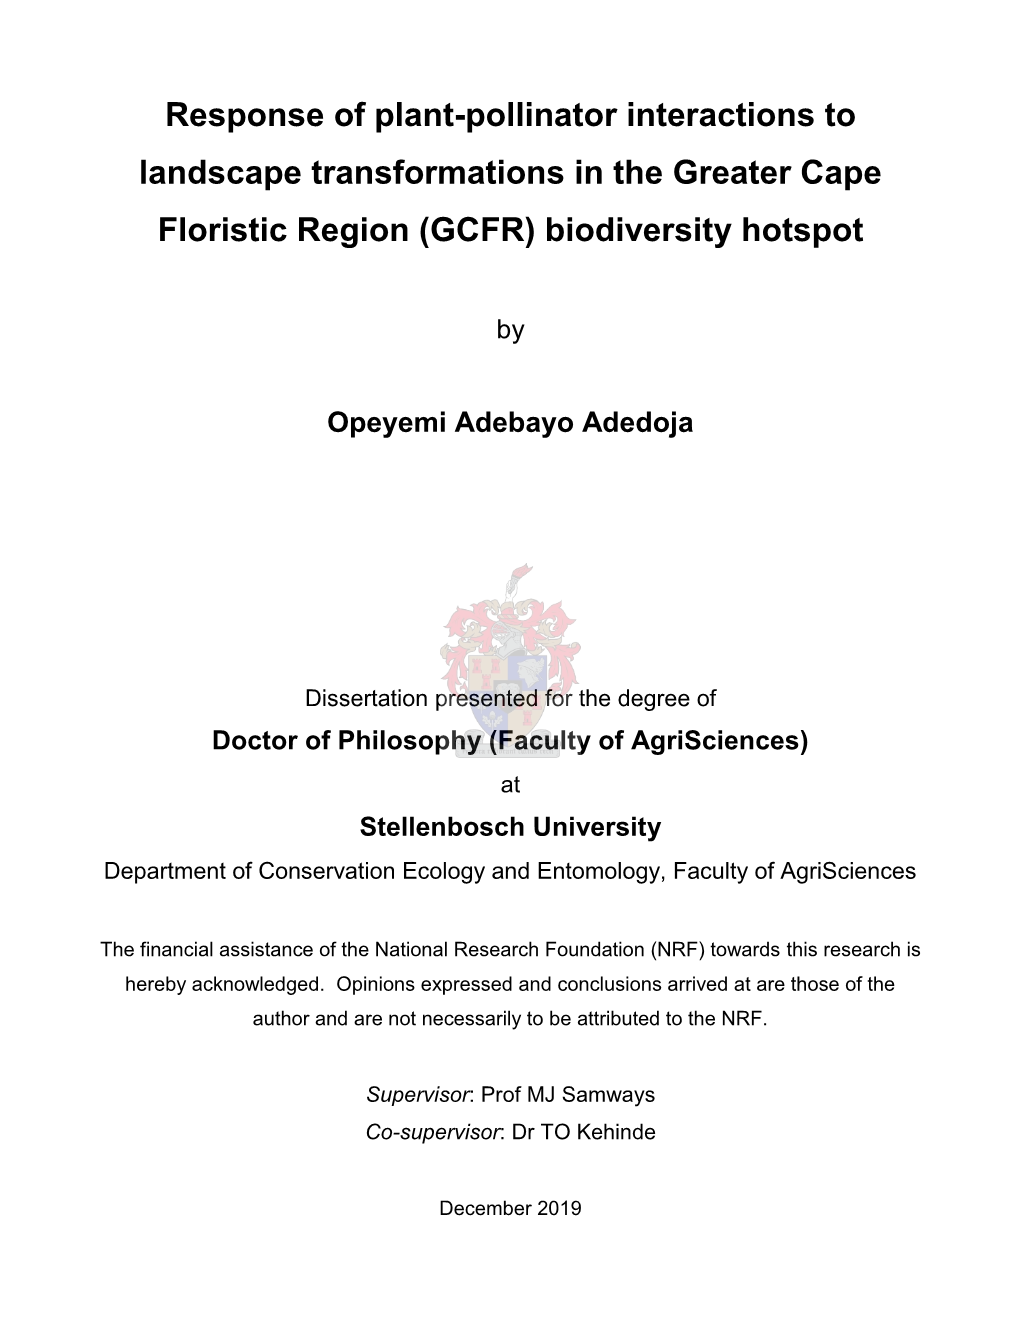 Response of Plant-Pollinator Interactions to Landscape Transformations in the Greater Cape Floristic Region (GCFR) Biodiversity Hotspot